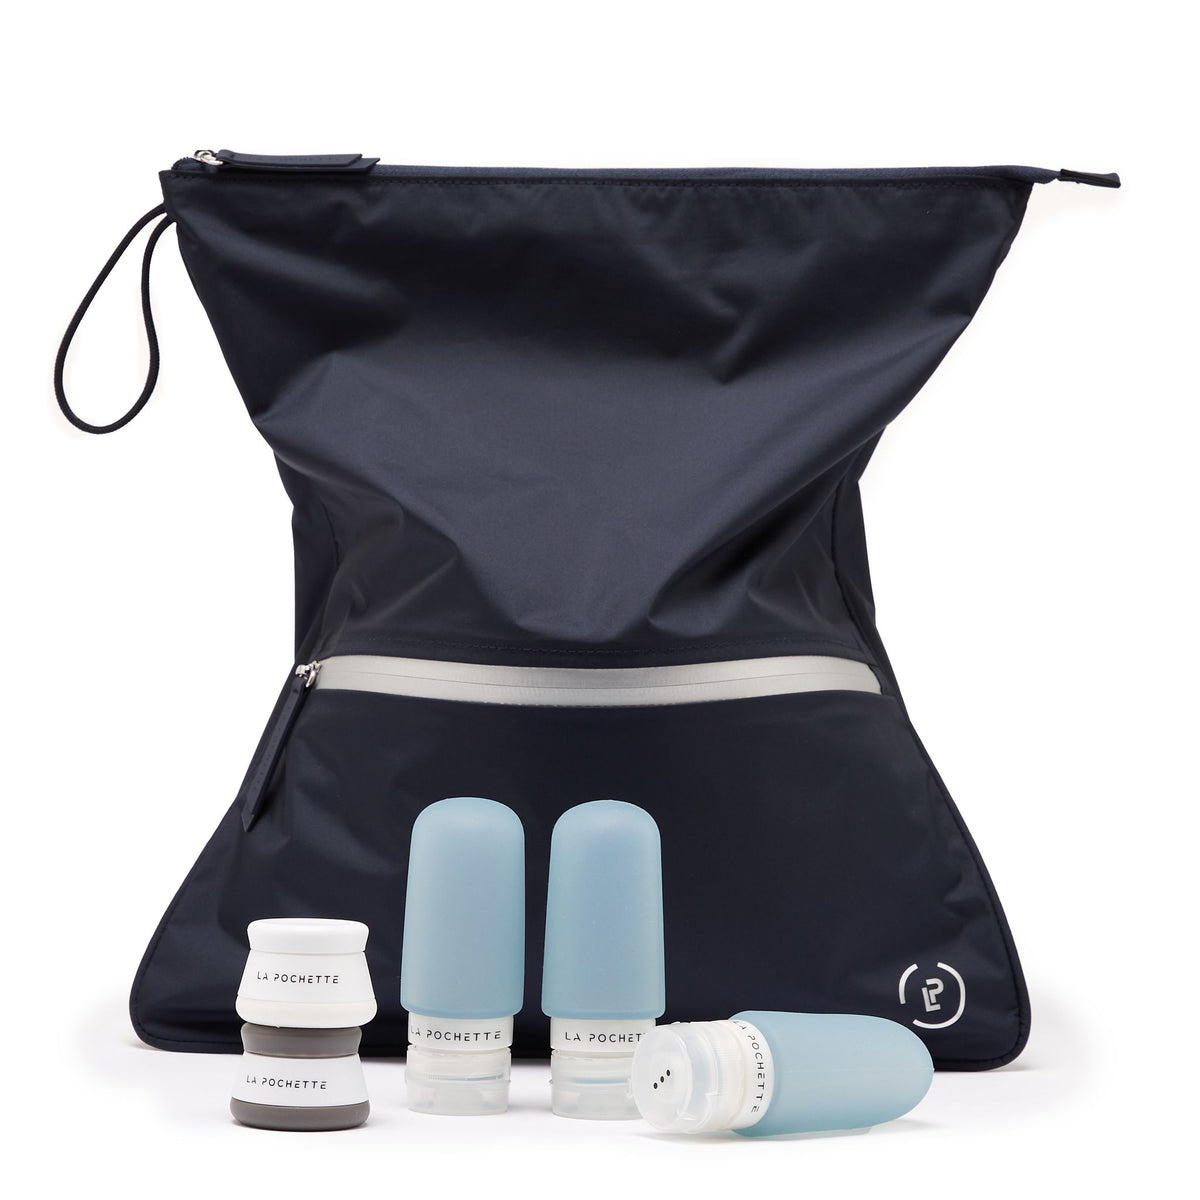 Midnight Silver Sweat bag bundle with travel pots and bottles